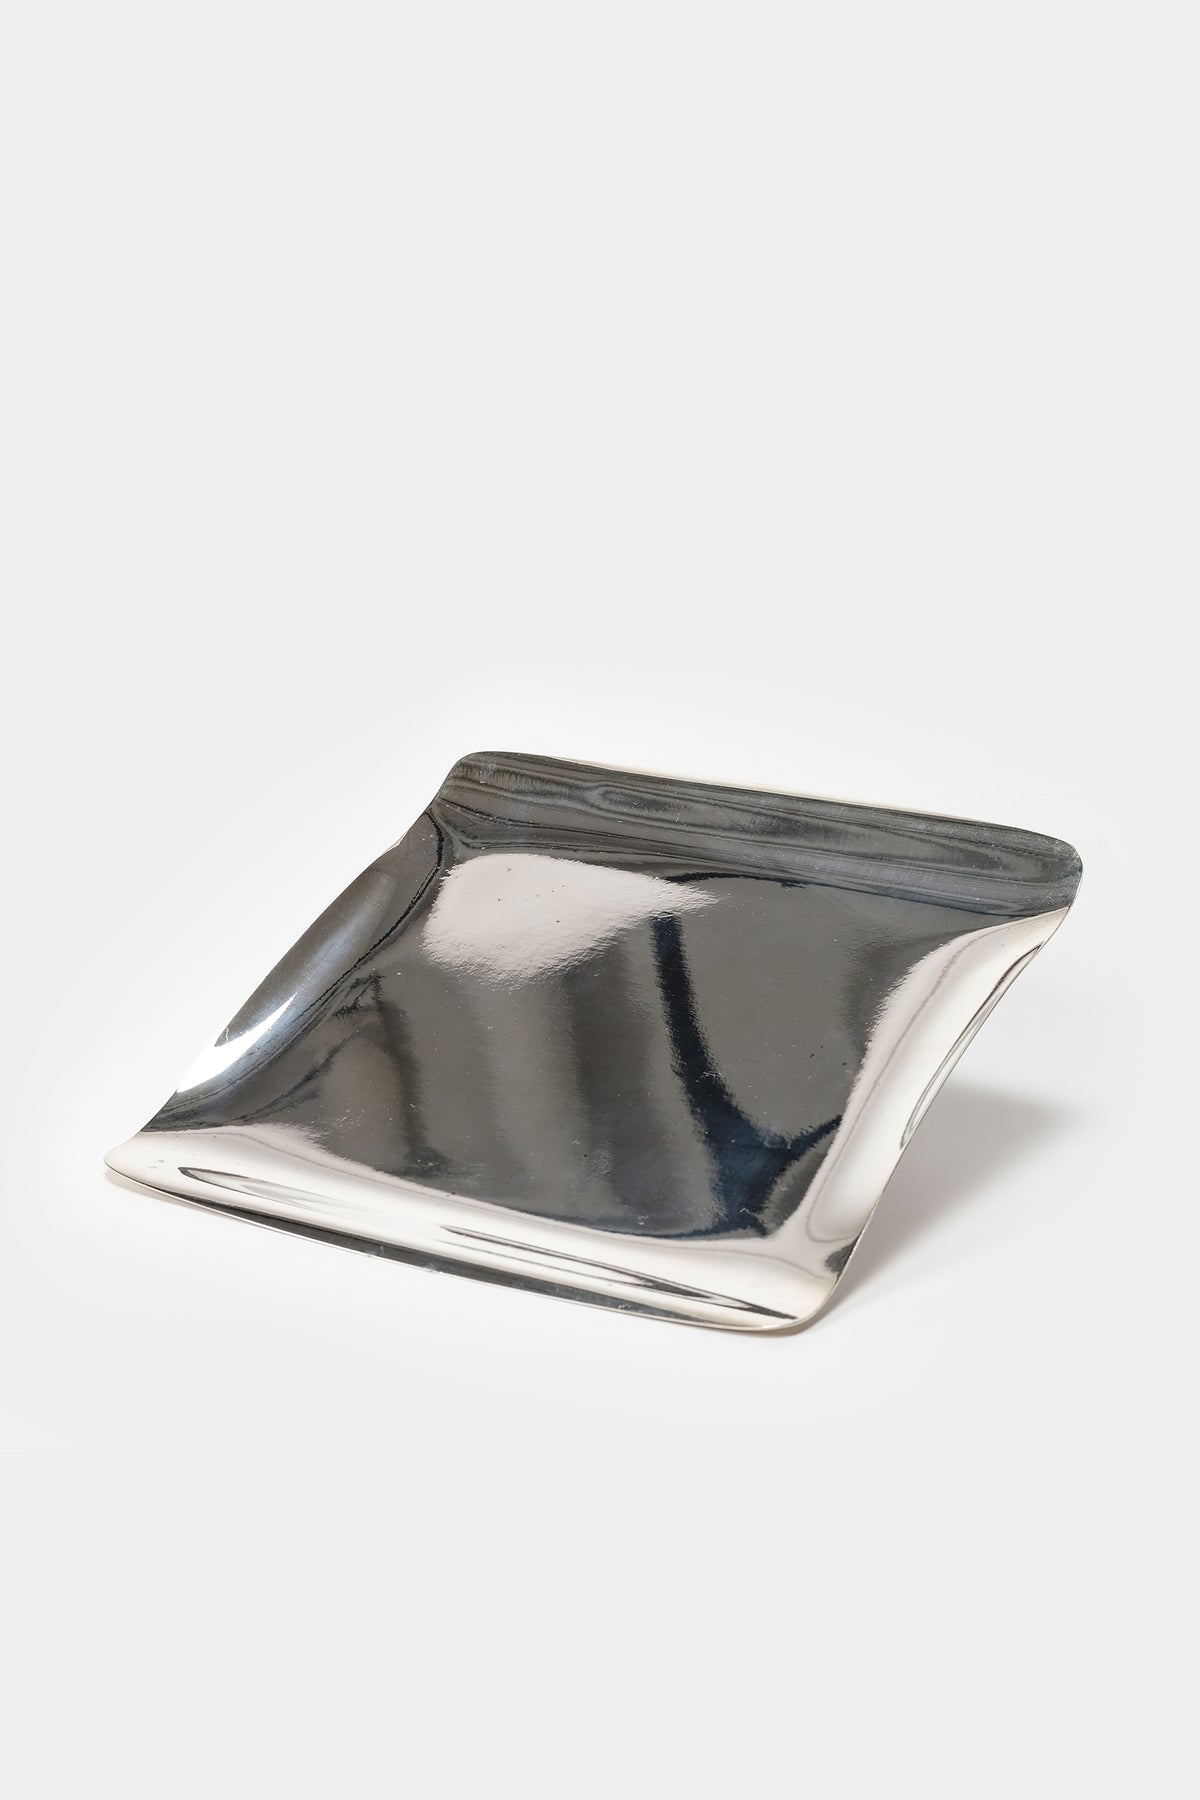 Günter Kupetz, Serving Tray "Only a Touch", WMF, 50s